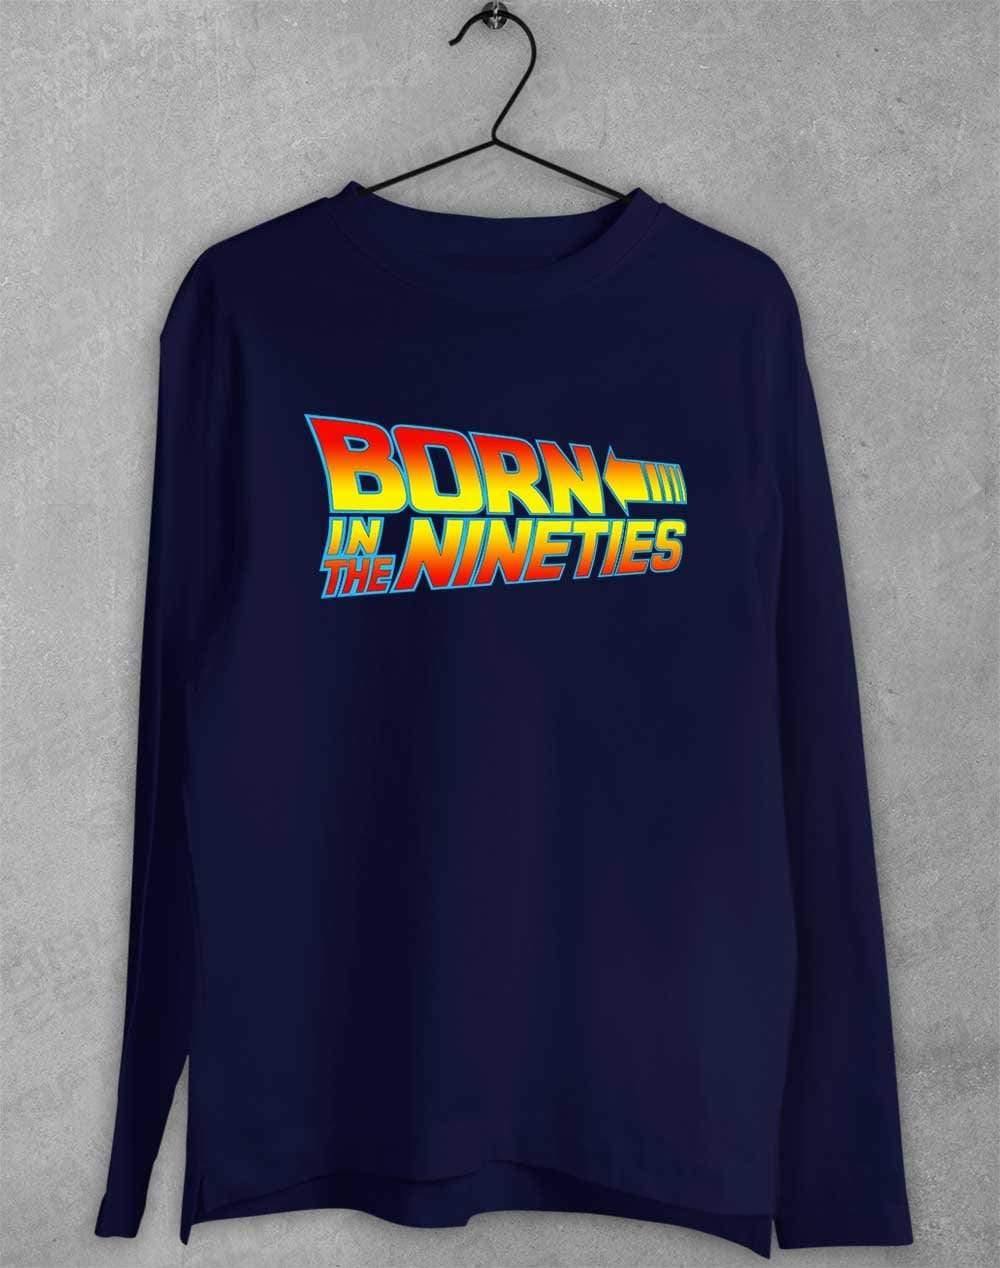 Born in the... (CHOOSE YOUR DECADE!) Long Sleeve T-Shirt 1990s - Navy / S  - Off World Tees